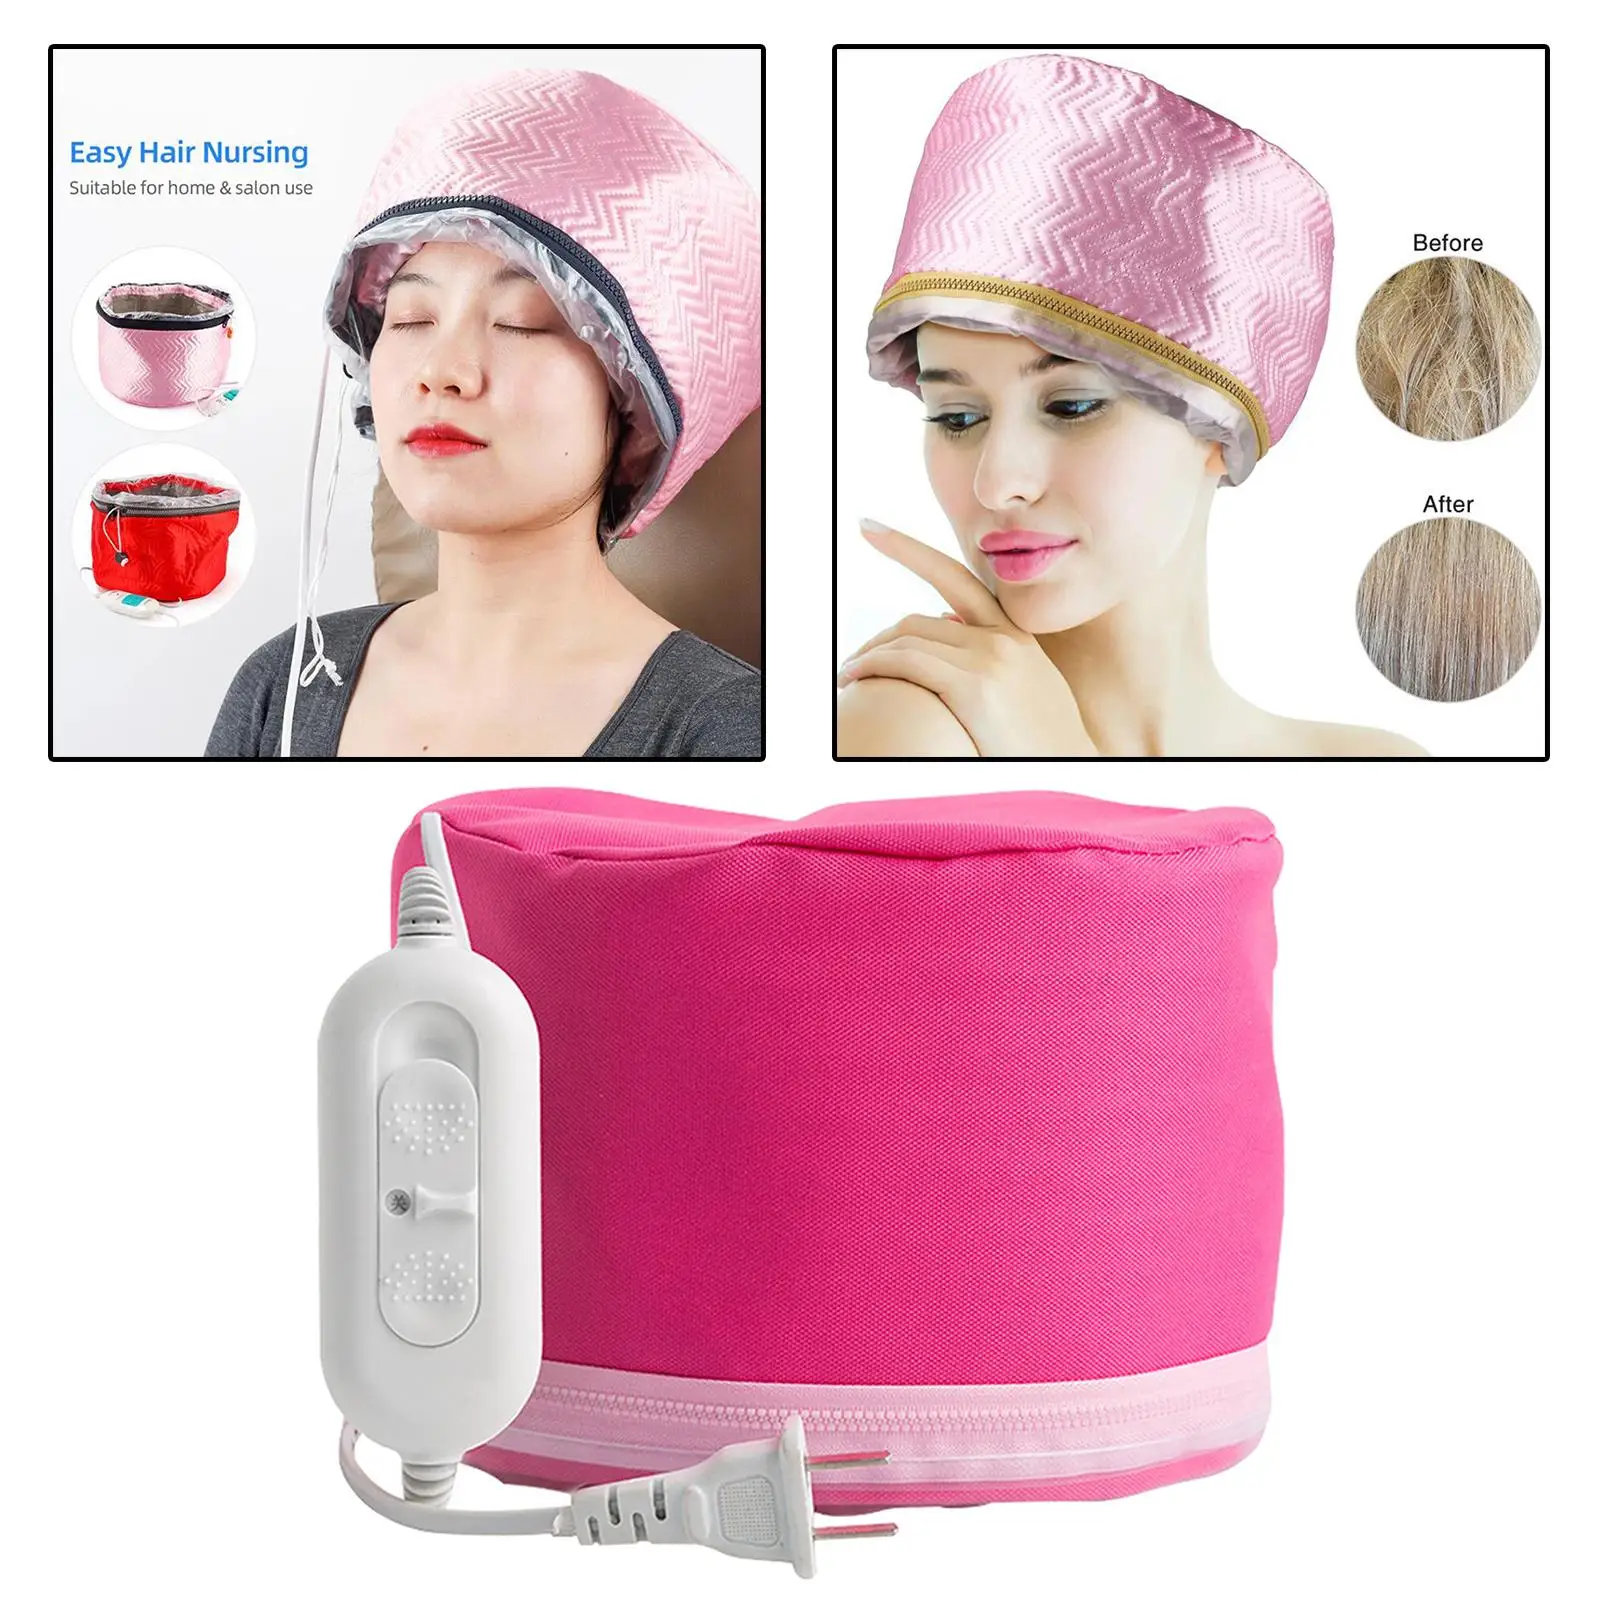 Hair Heating Caps Steamer 3-Mode Adjustable Size with Zipper Essential Oil Caps for Deep Conditioning Salon Natural Hair Nursing